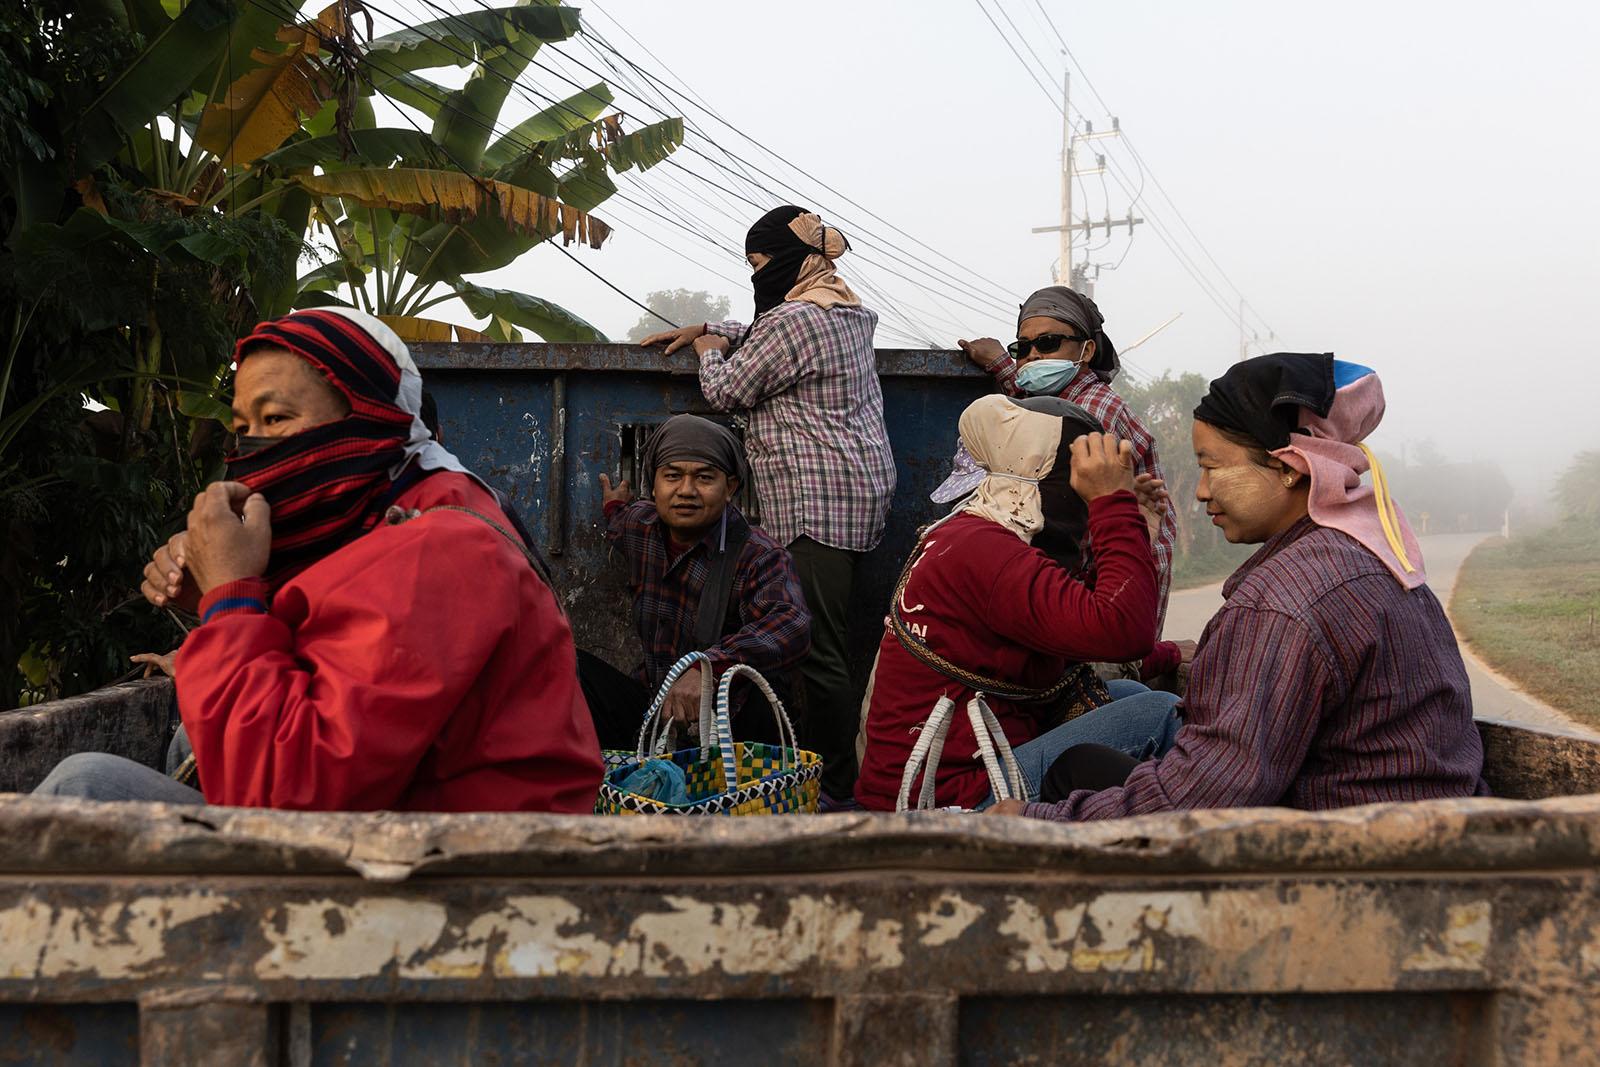 LIFE ON THE OTHER SIDE - Chiang Rai - Every morning the migrant workers from this...